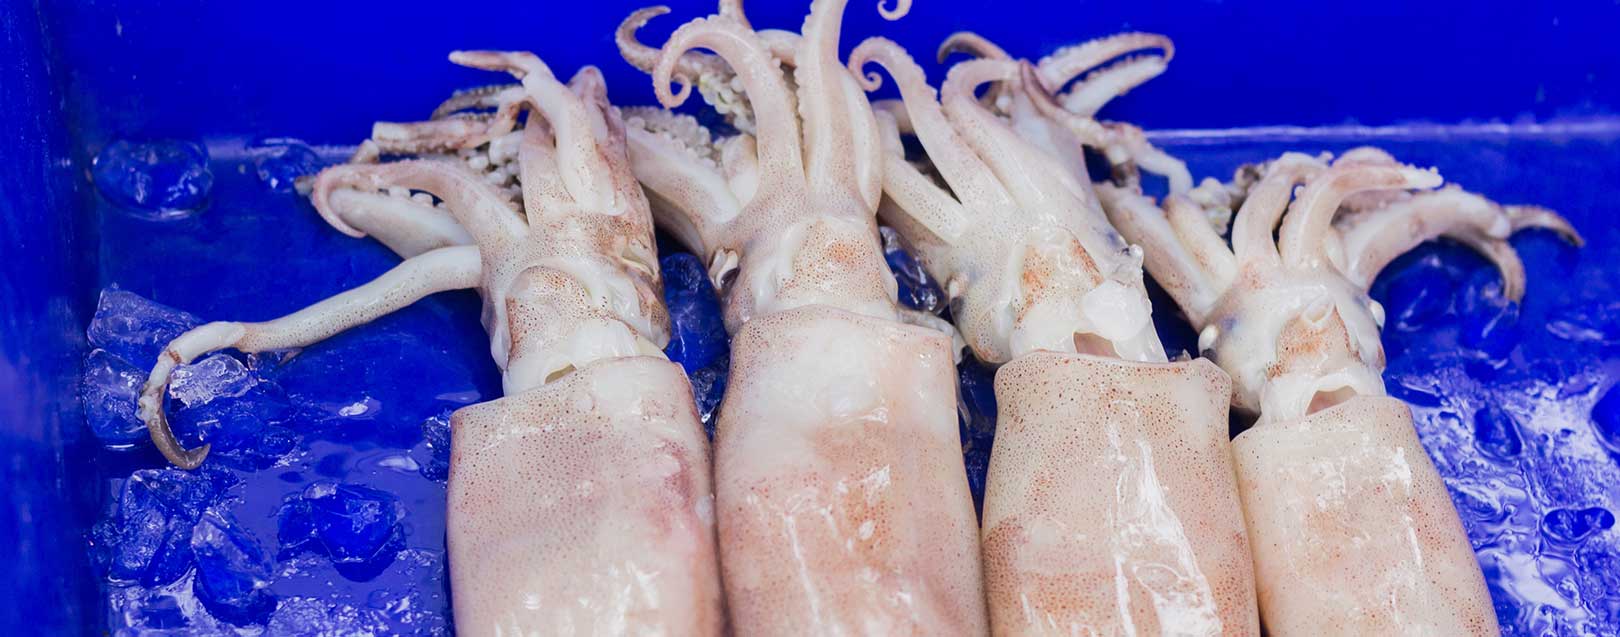 Vietnam’s cuttlefish, octopus export to grow this year